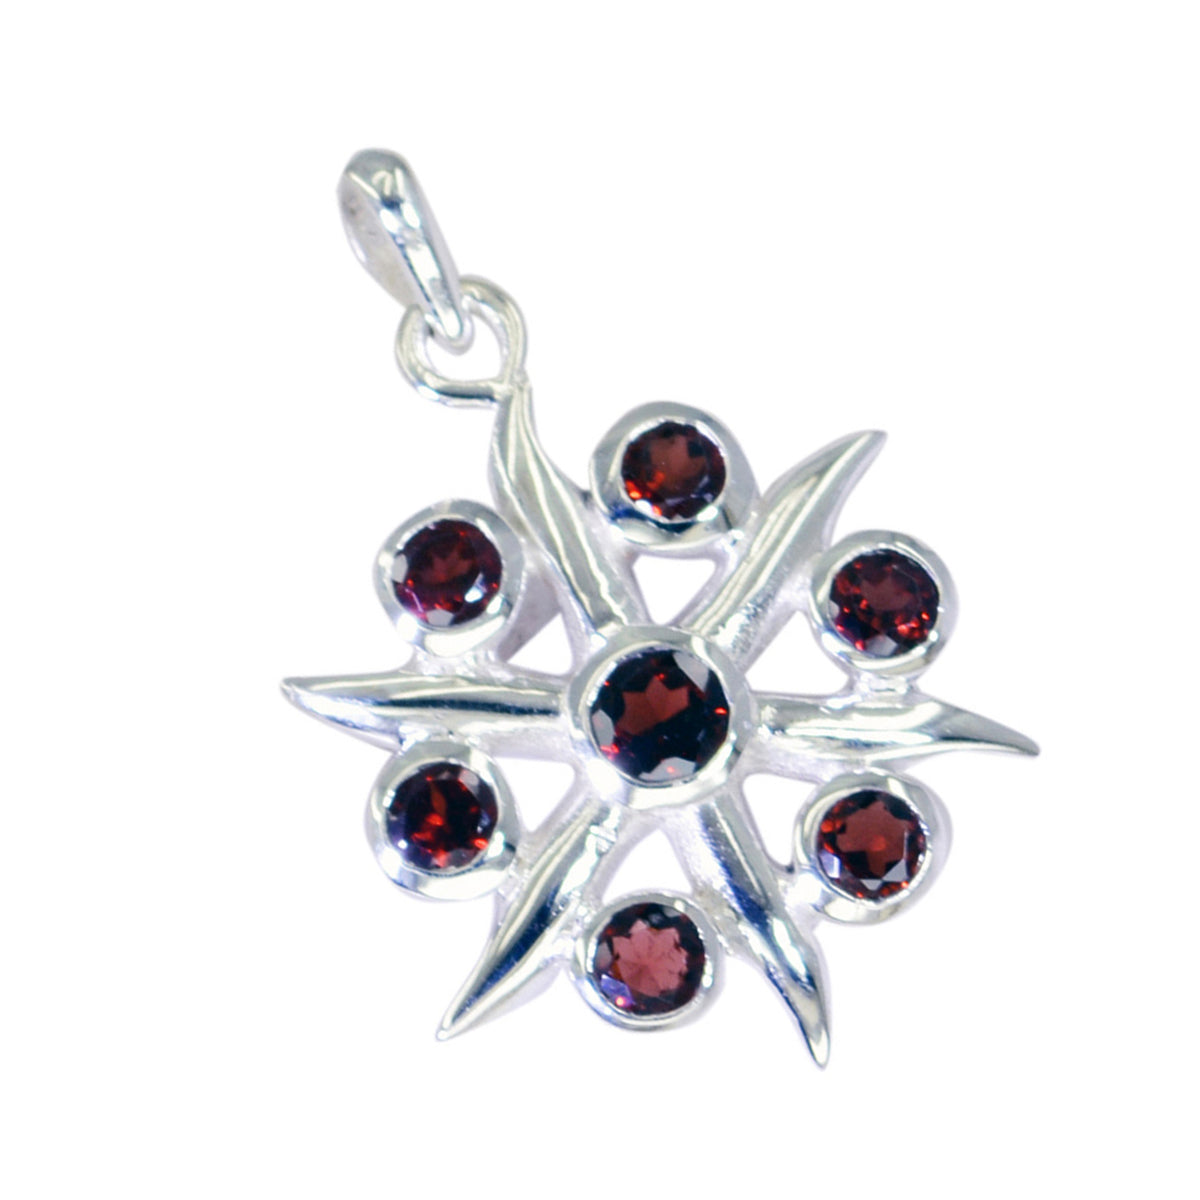 Riyo Gorgeous Gemstone Round Faceted Red Garnet 1047 Sterling Silver Pendant Gift For Teachers Day